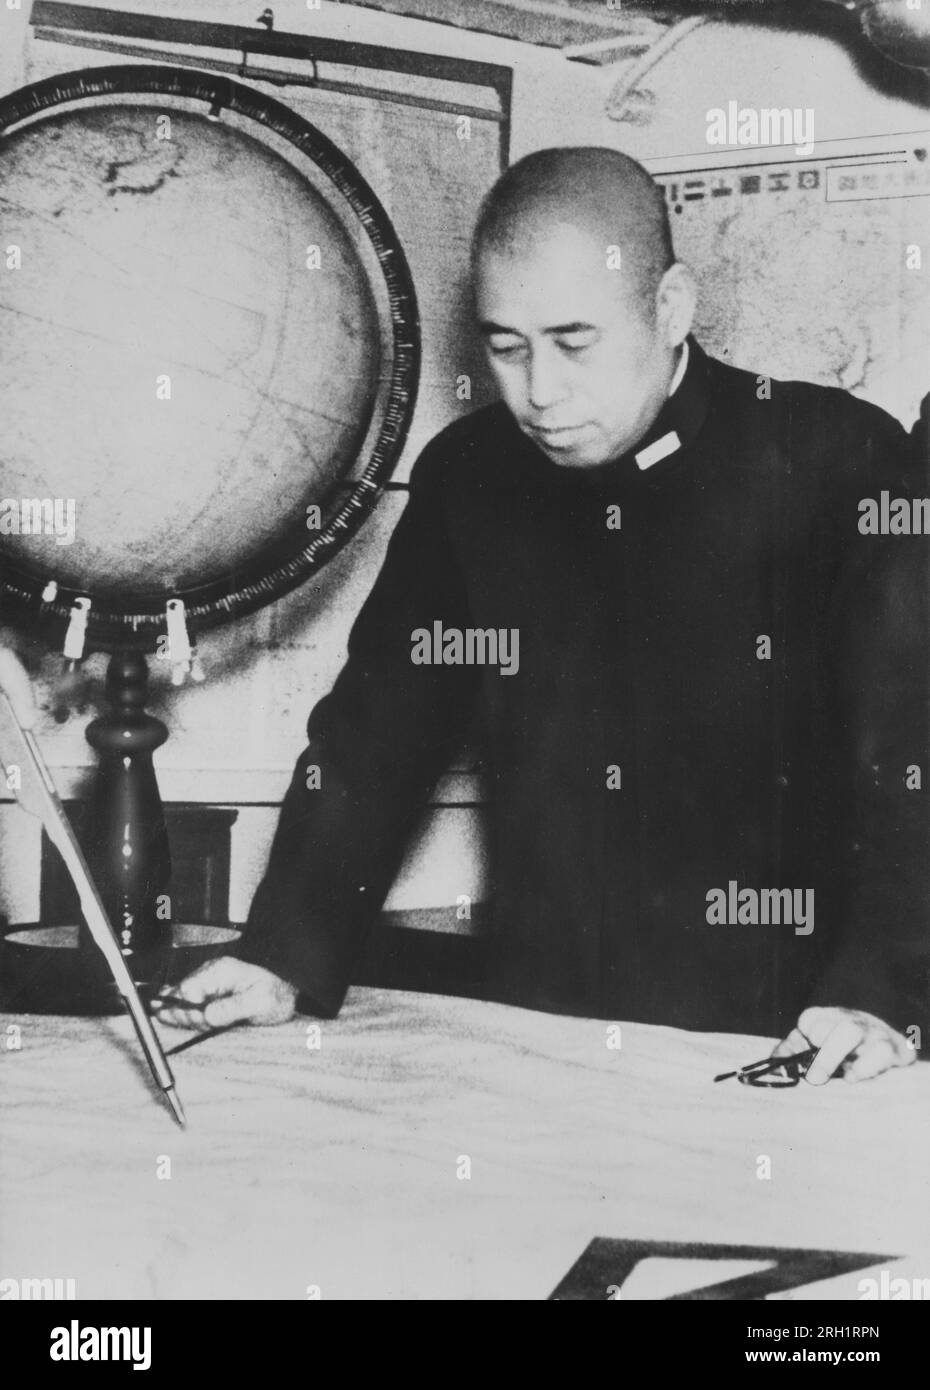 Pacific War, 1941-1945. Admiral Yamamoto Isoroku, Commander-in-Chief of the Imperial Japanese Navy Combined Fleet from August 11 1941 until his death in “Operation Vengeance” on April 18 1943. Stock Photo